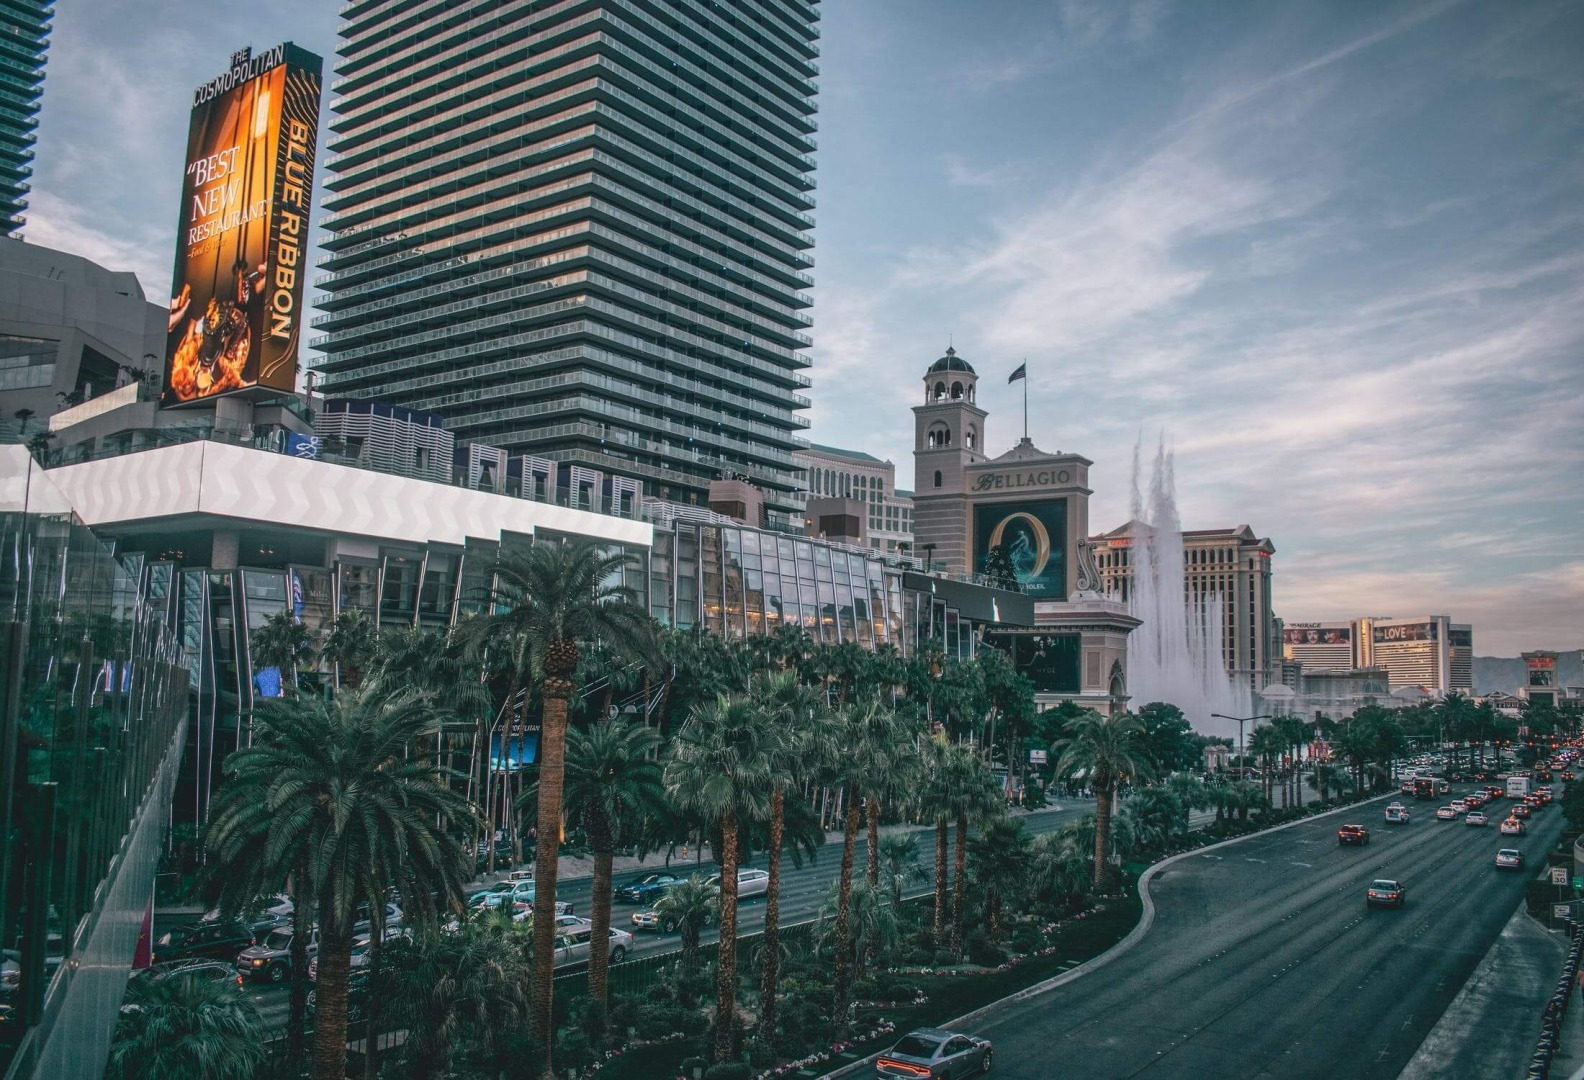 HIMSS 2021: Day 3 - Live From the NL to Las Vegas 